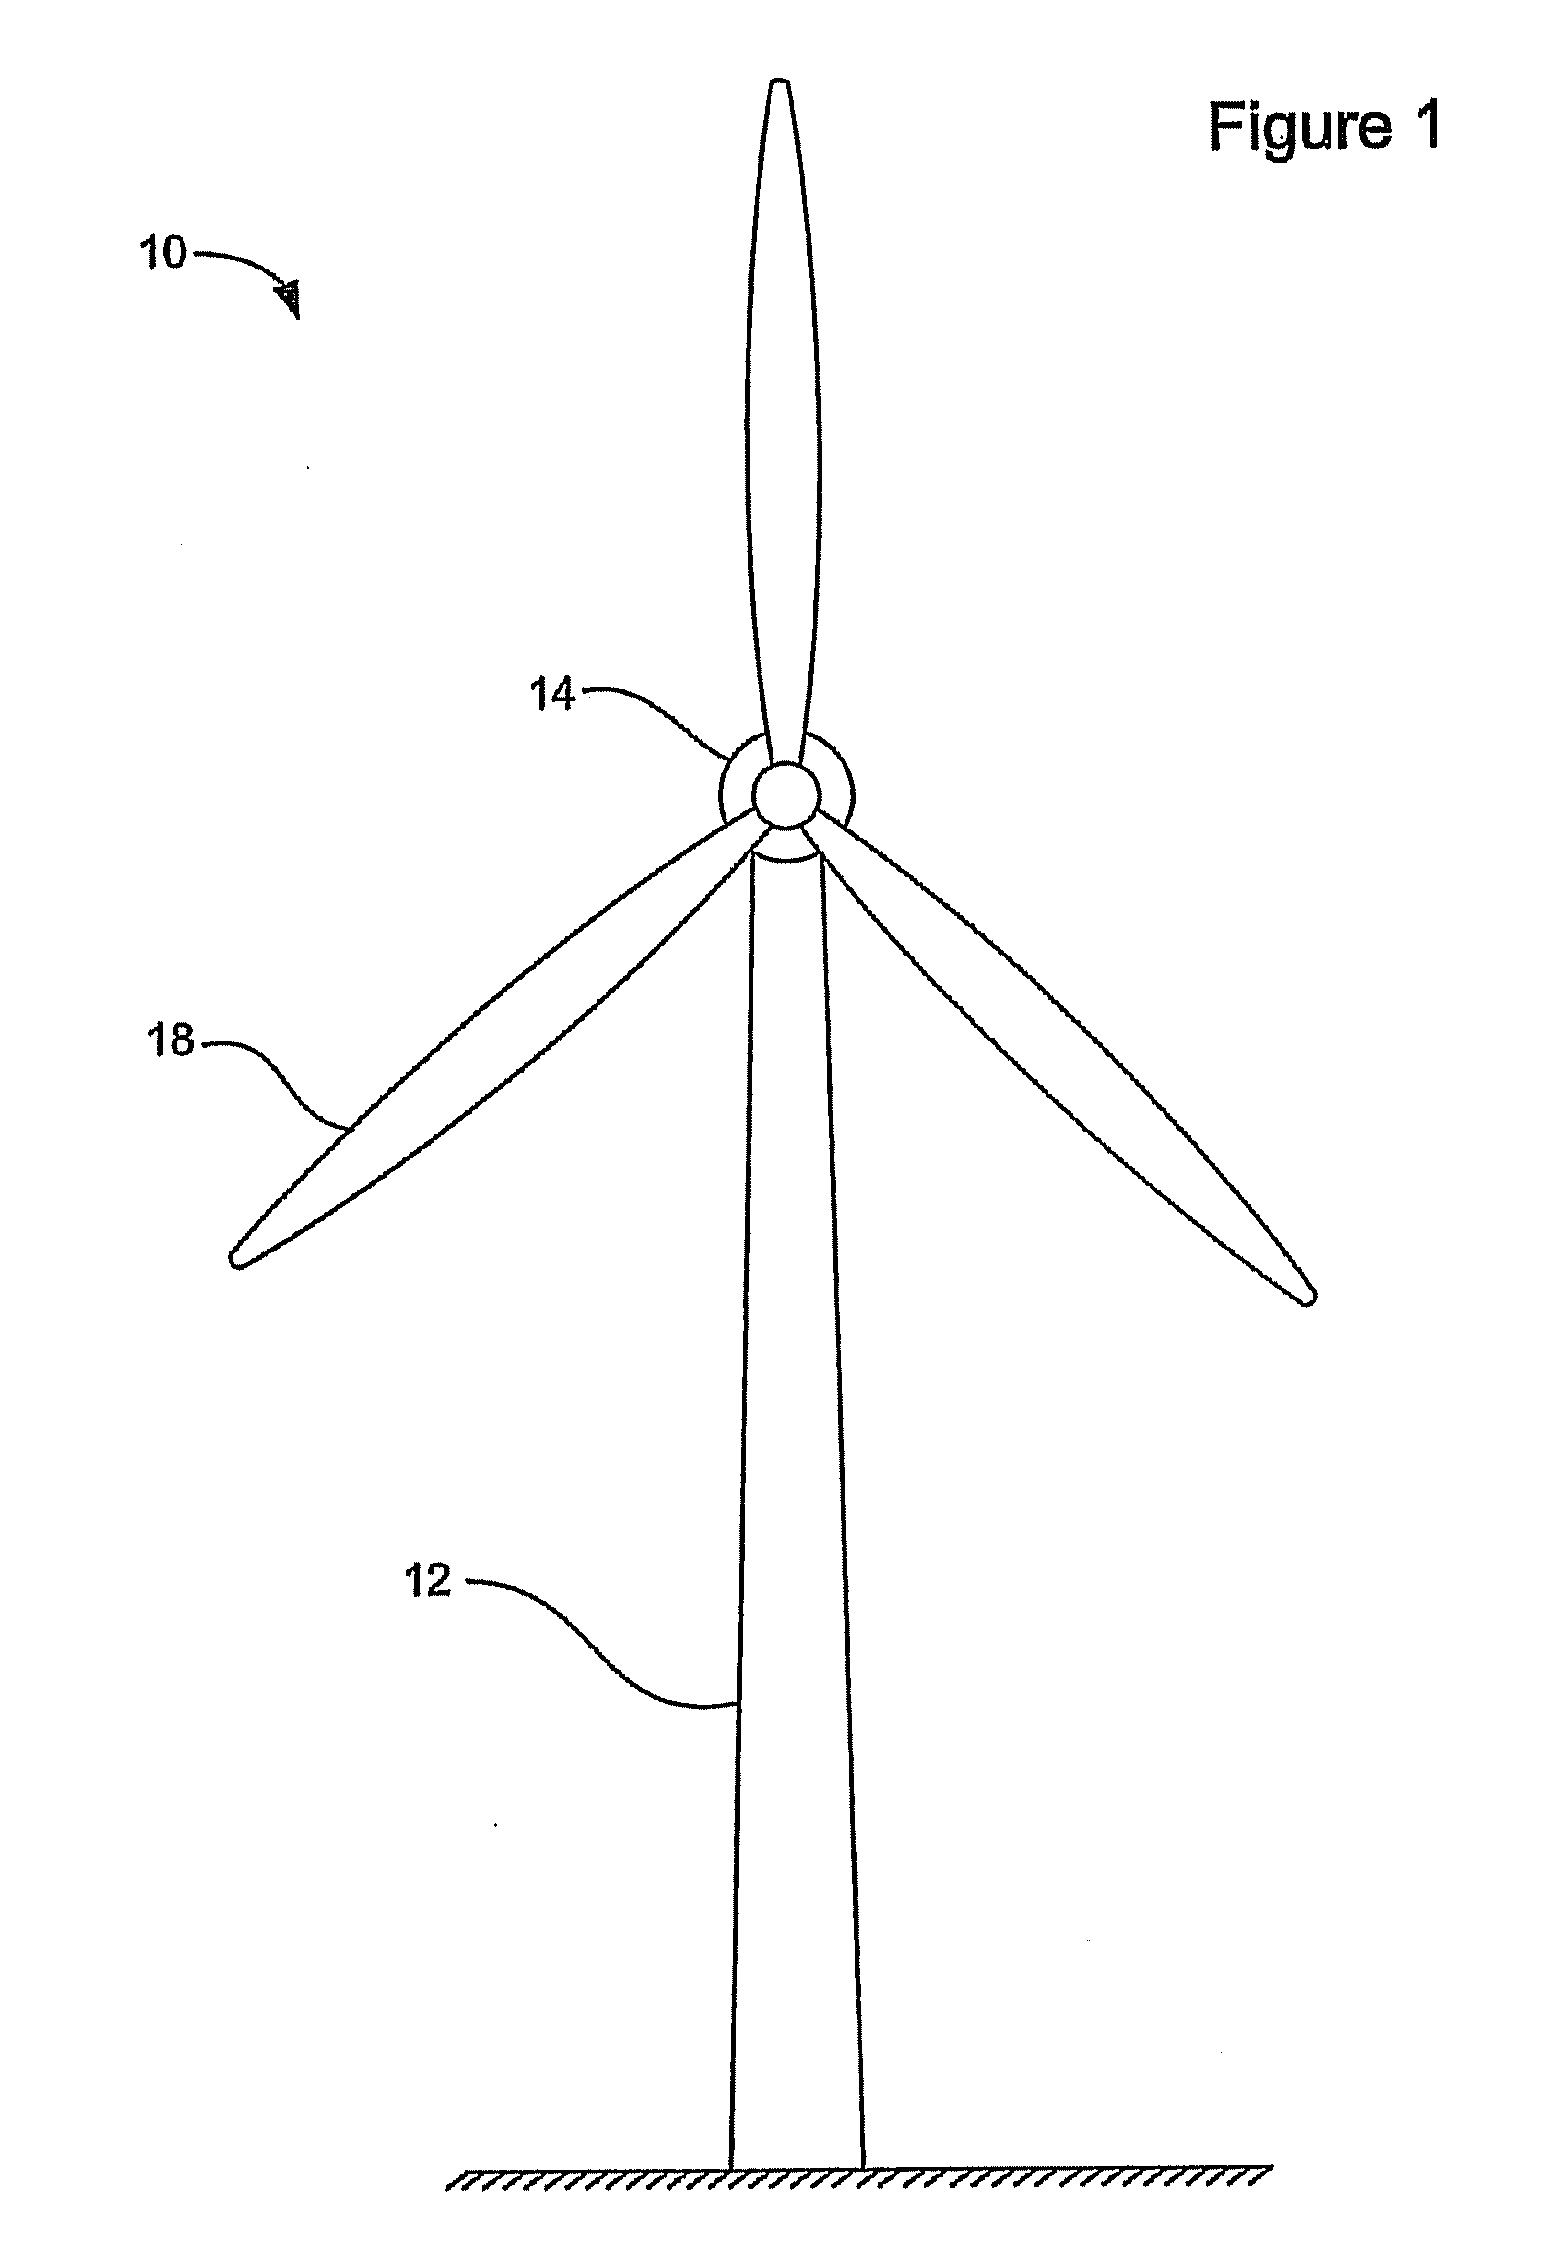 Variable speed operating system and method of operation for wind turbines